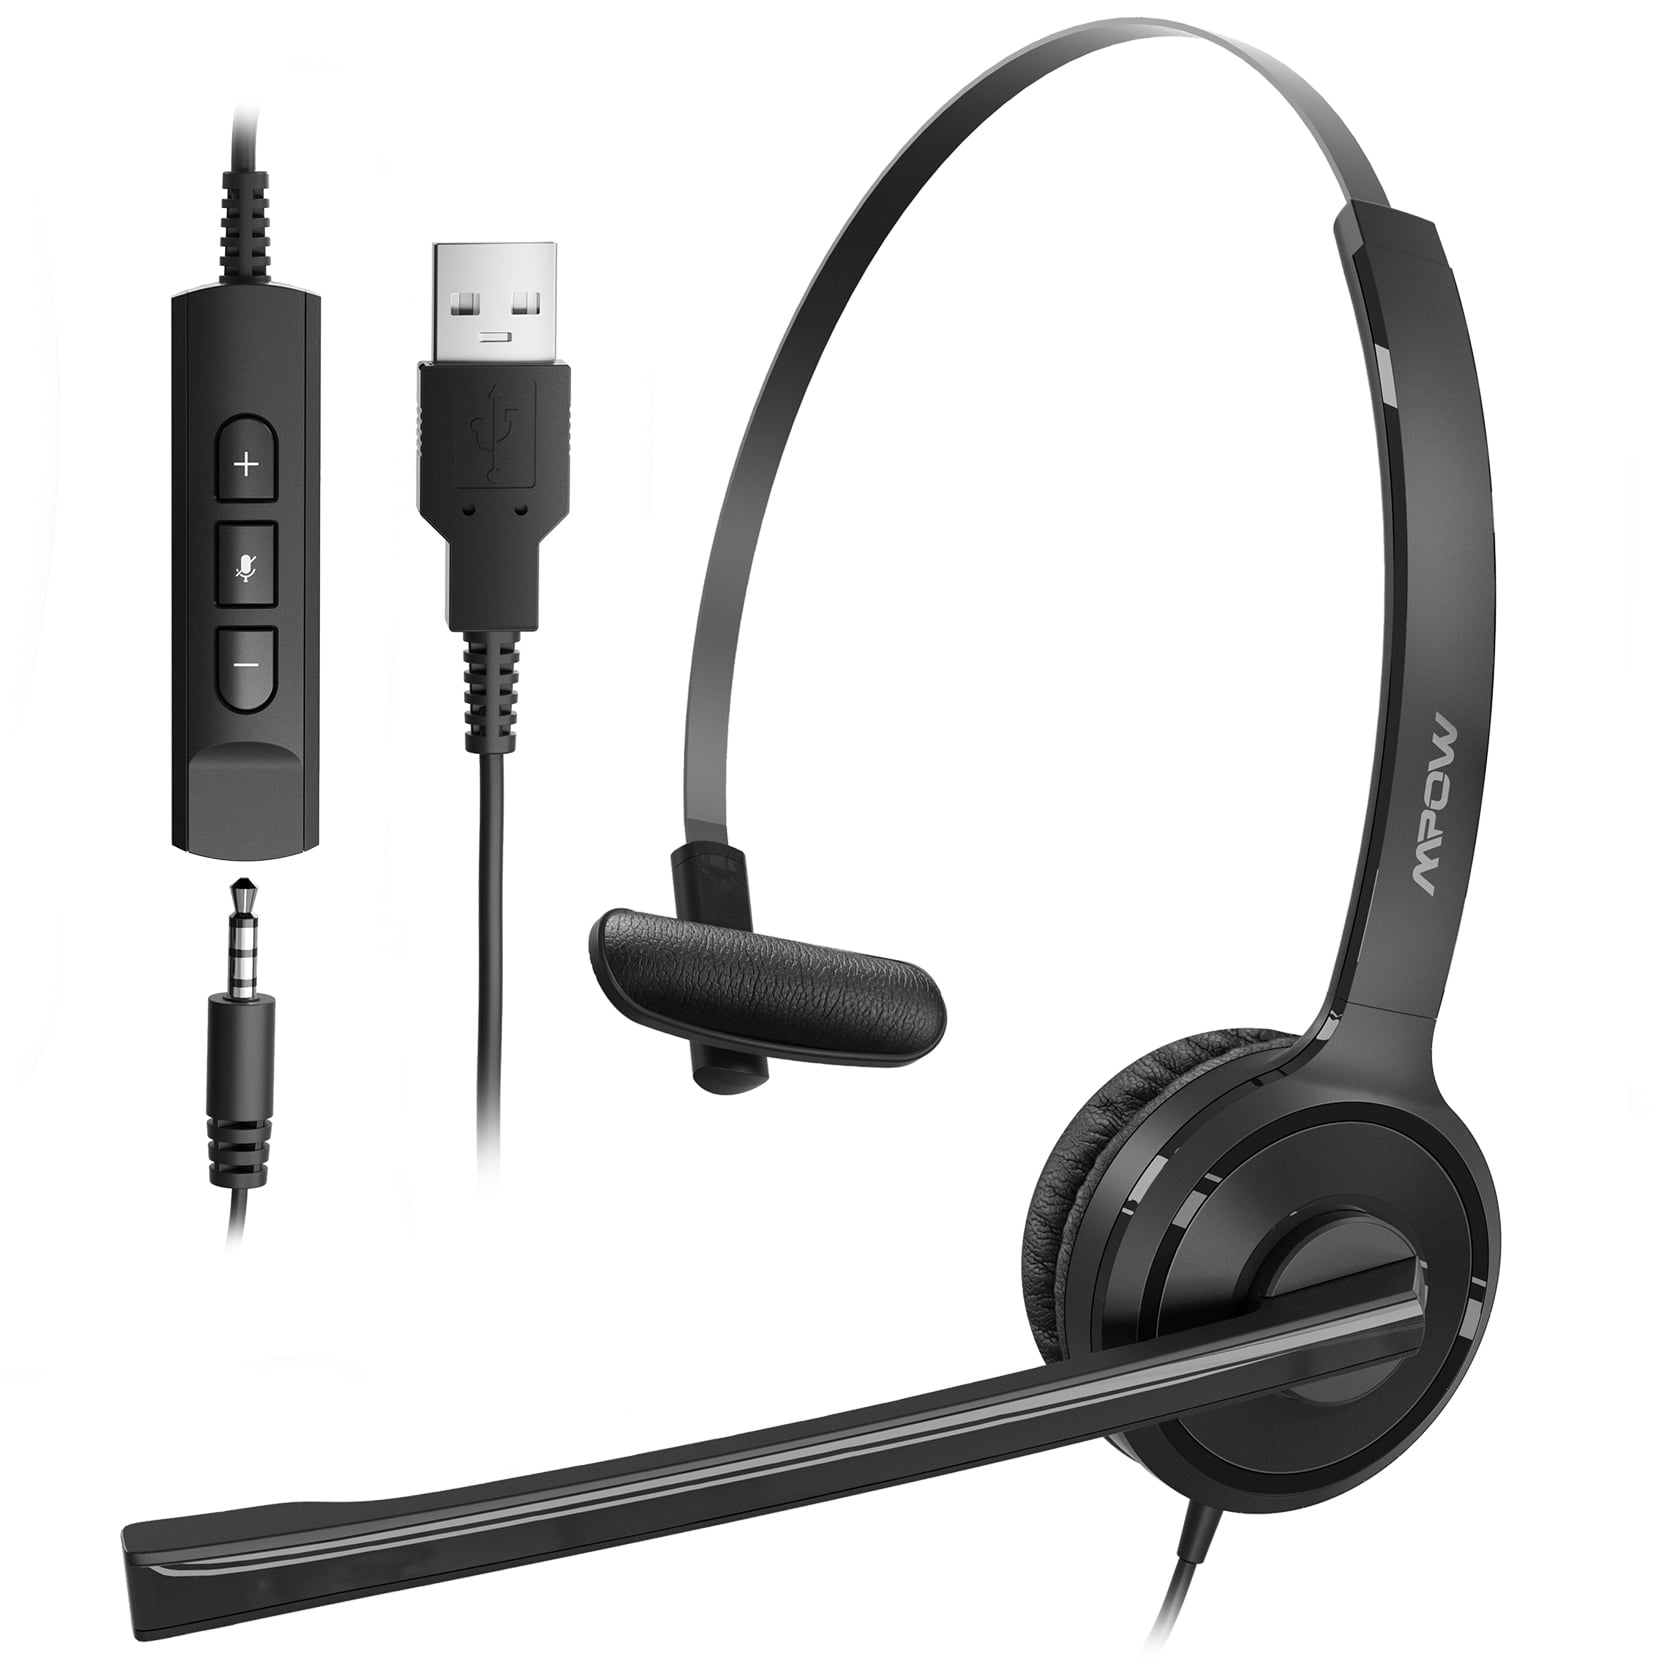 Zoom Skype On Ear 3.5mm Office Call Center Headset with Mic Noise Cancelling Compouter Headphones with Inline Control USB Headset with Microphone for Laptop Stereo Wired Headset for Cell Phone 